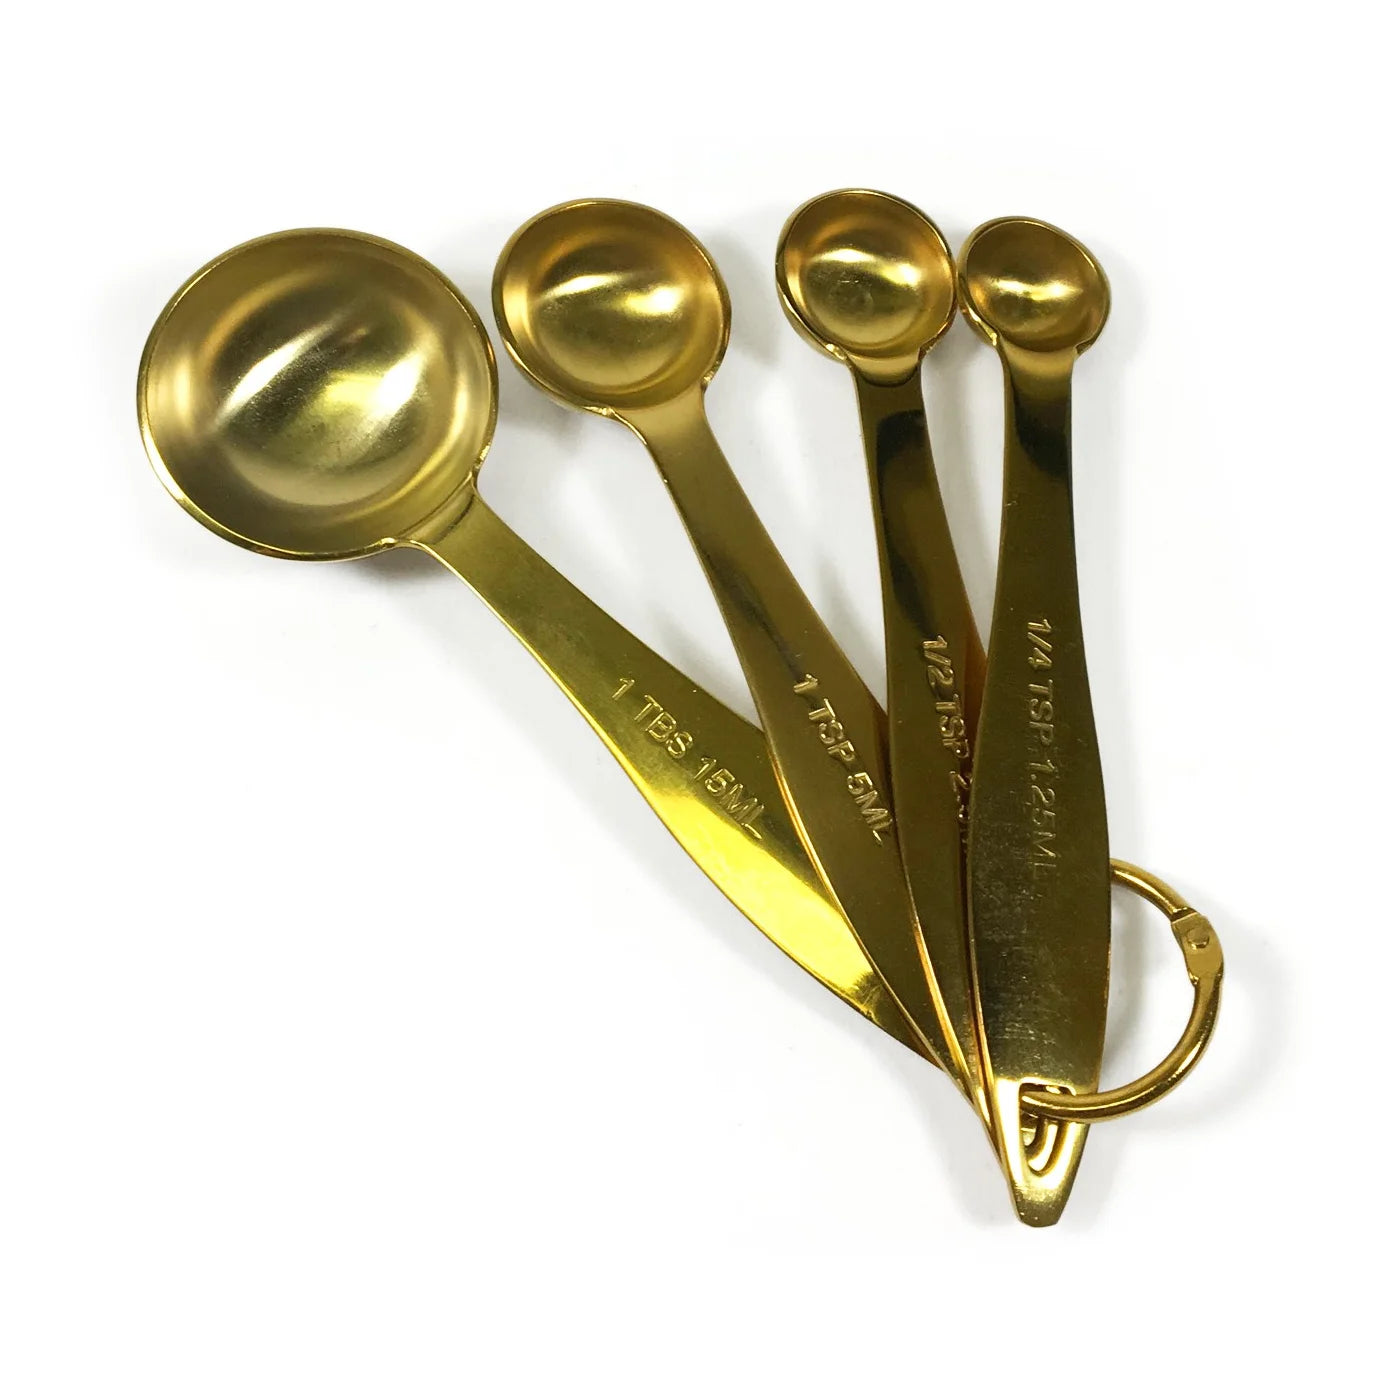 Measuring Spoons S/4 Gold